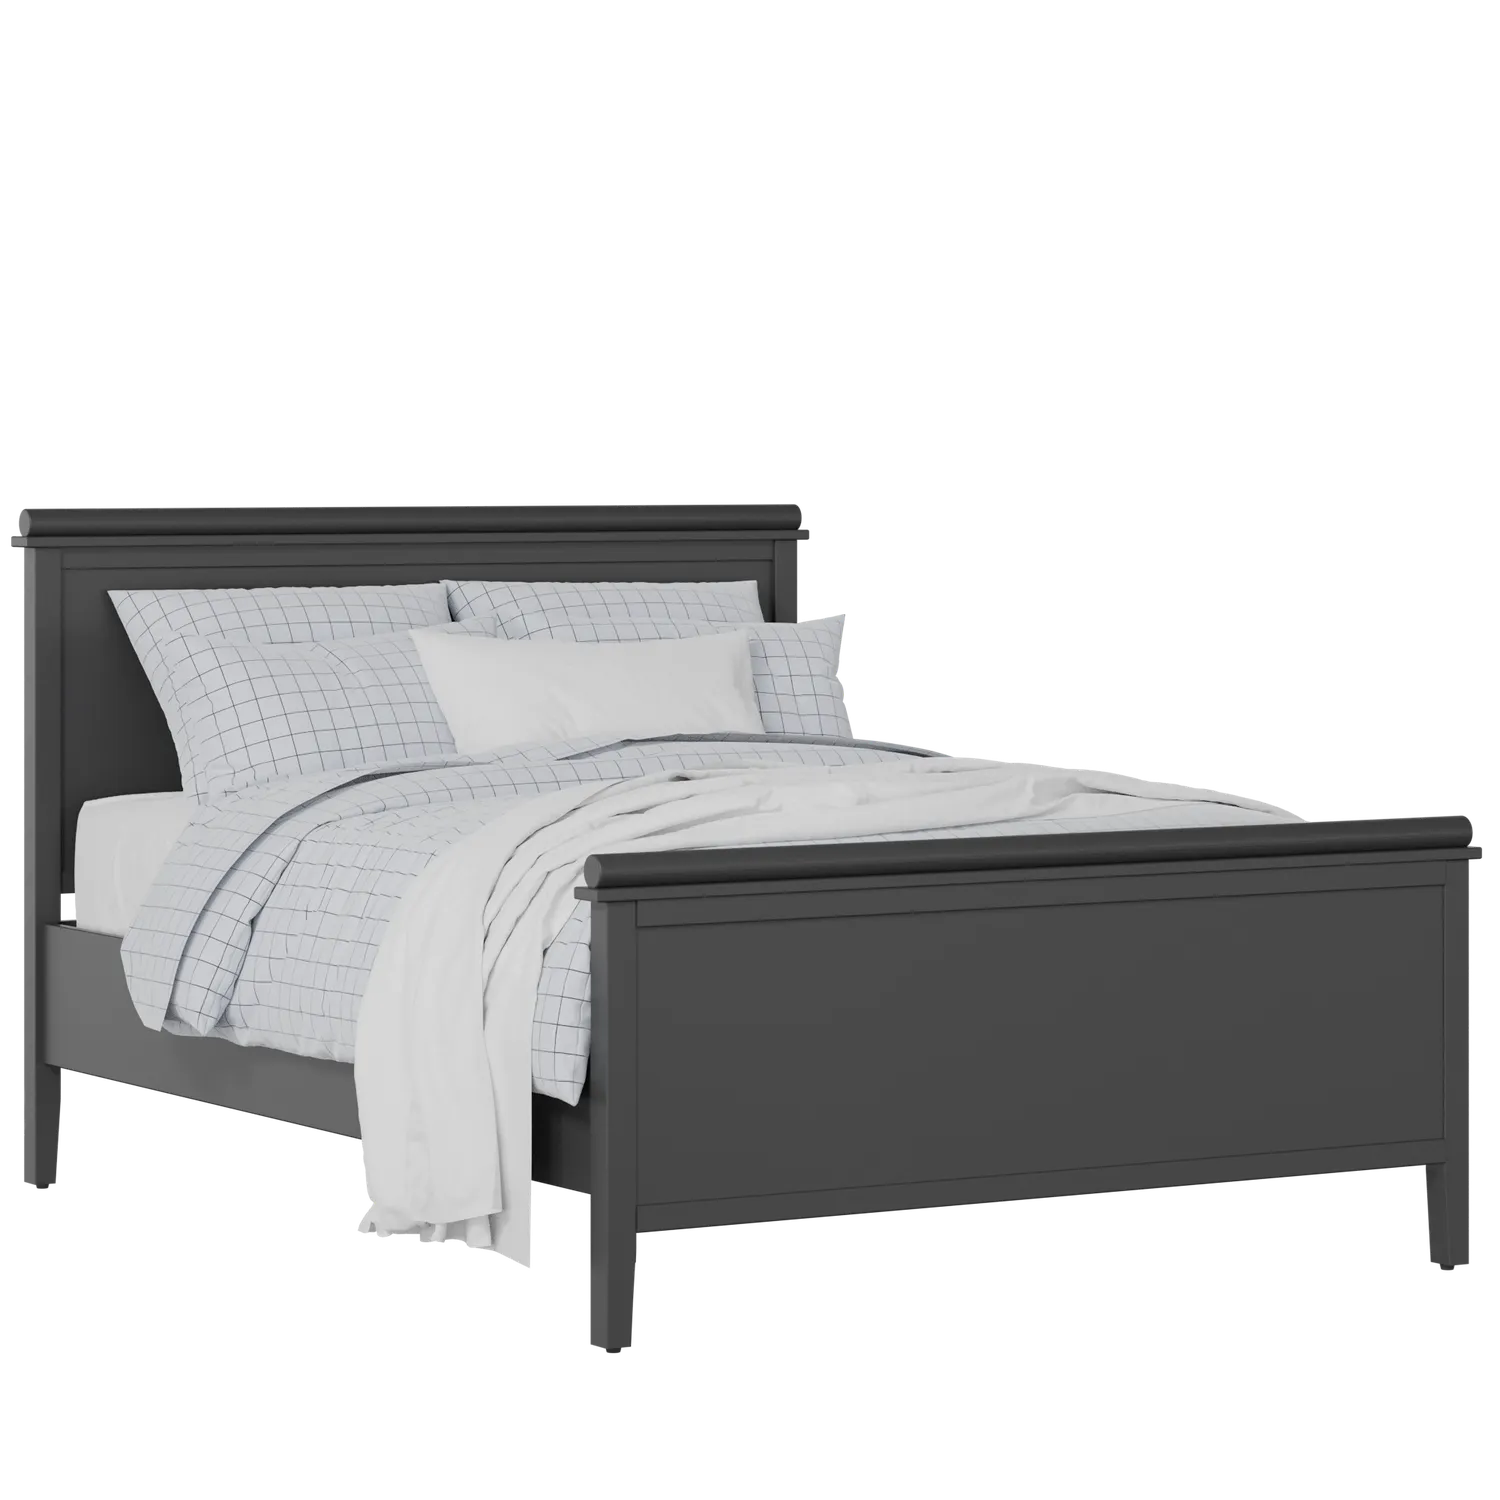 Nocturne painted wood bed in black with Juno mattress